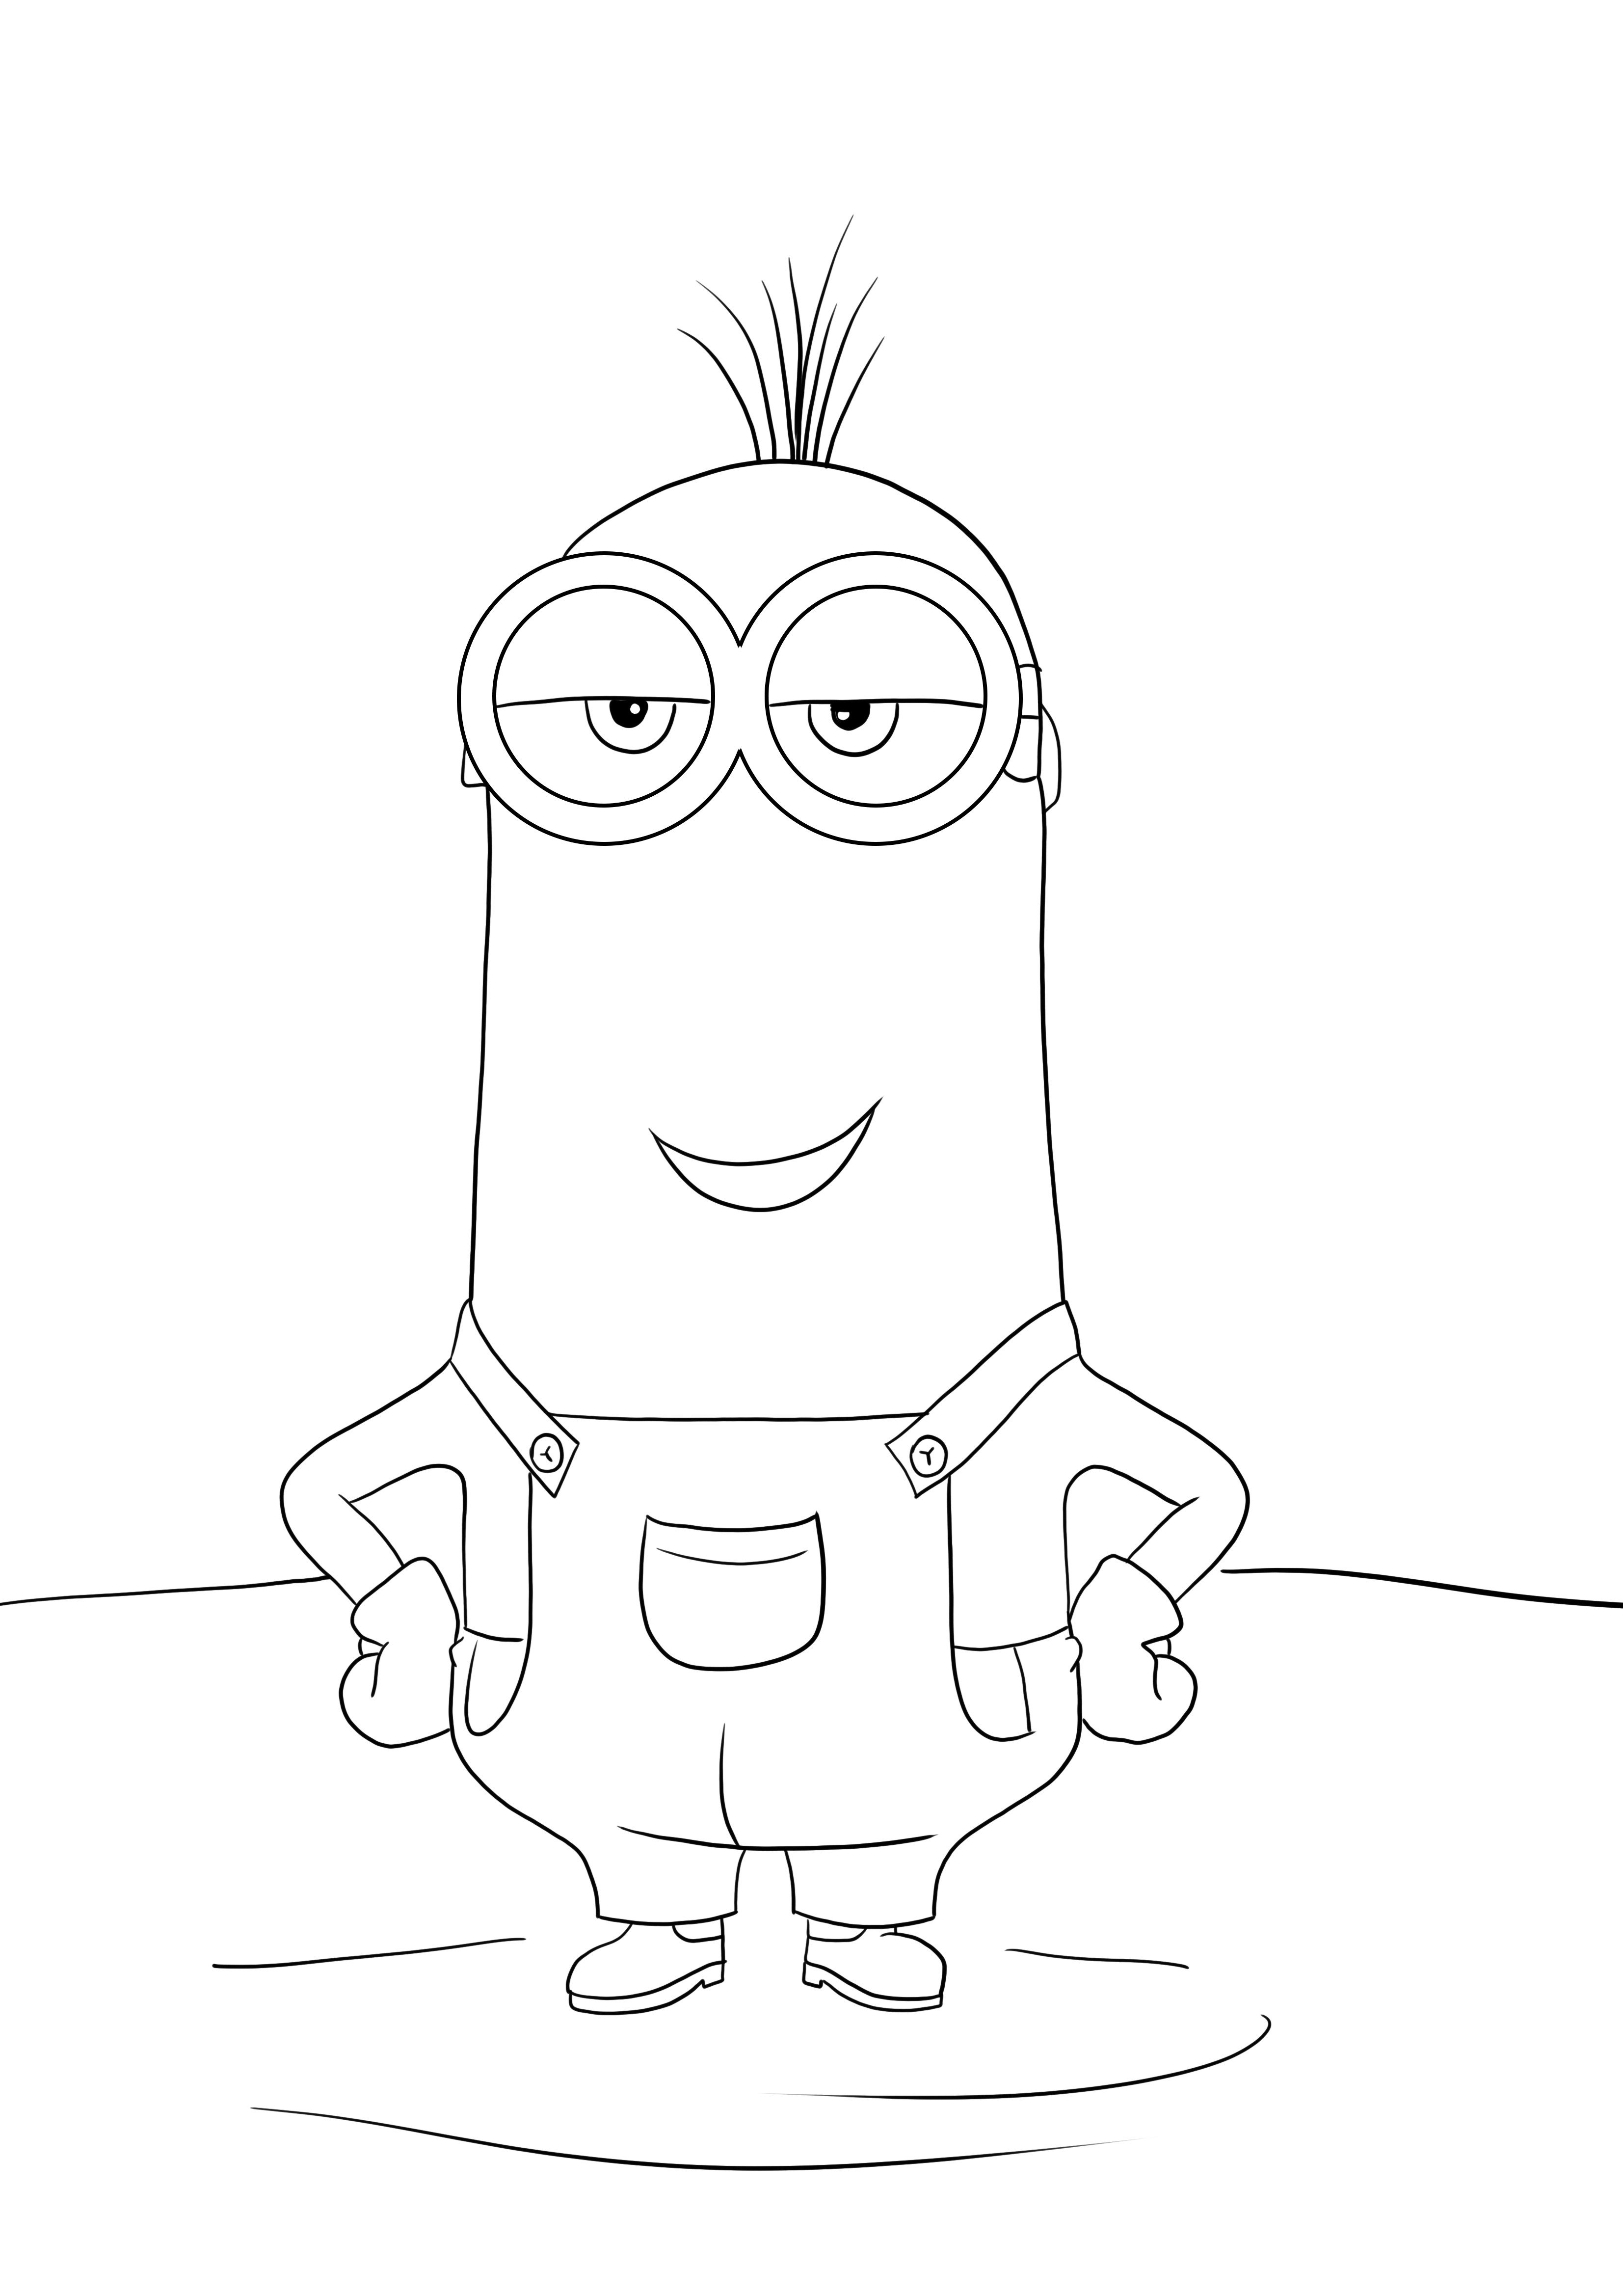 Kevin from Despicable Me free image to print and color